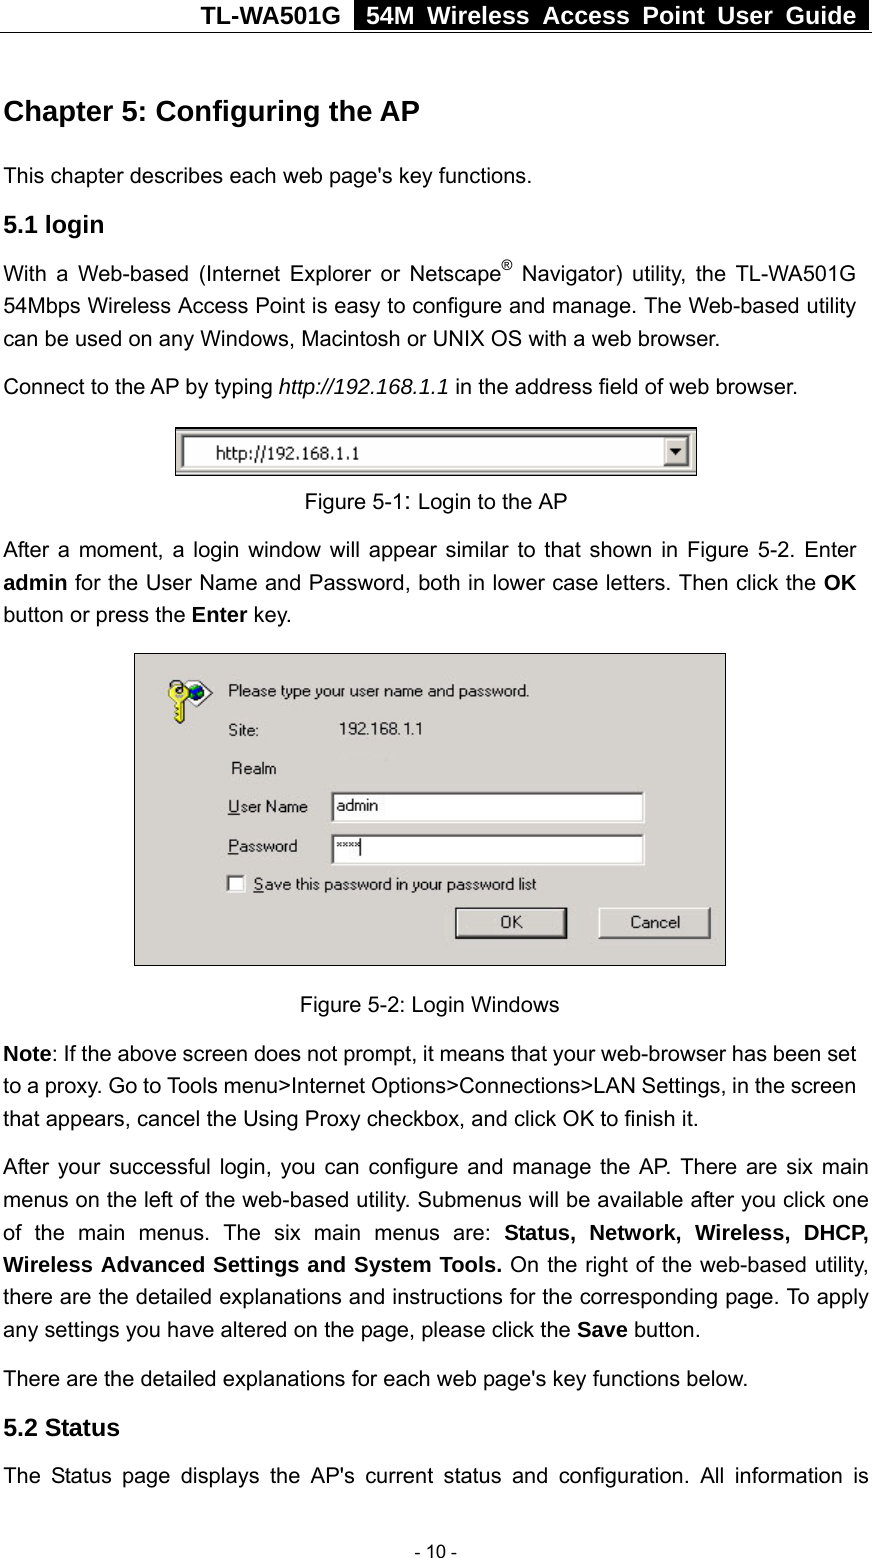 TL-WA501G   54M Wireless Access Point User Guide  Chapter 5: Configuring the AP This chapter describes each web page&apos;s key functions. 5.1 login   With a Web-based (Internet Explorer or Netscape® Navigator) utility, the TL-WA501G 54Mbps Wireless Access Point is easy to configure and manage. The Web-based utility can be used on any Windows, Macintosh or UNIX OS with a web browser. Connect to the AP by typing http://192.168.1.1 in the address field of web browser.  Figure 5-1: Login to the AP After a moment, a login window will appear similar to that shown in Figure 5-2. Enter admin for the User Name and Password, both in lower case letters. Then click the OK button or press the Enter key.   Figure 5-2: Login Windows Note: If the above screen does not prompt, it means that your web-browser has been set to a proxy. Go to Tools menu&gt;Internet Options&gt;Connections&gt;LAN Settings, in the screen that appears, cancel the Using Proxy checkbox, and click OK to finish it. After your successful login, you can configure and manage the AP. There are six main menus on the left of the web-based utility. Submenus will be available after you click one of the main menus. The six main menus are: Status, Network, Wireless, DHCP, Wireless Advanced Settings and System Tools. On the right of the web-based utility, there are the detailed explanations and instructions for the corresponding page. To apply any settings you have altered on the page, please click the Save button.   There are the detailed explanations for each web page&apos;s key functions below.   5.2 Status The Status page displays the AP&apos;s current status and configuration. All information is  - 10 - 